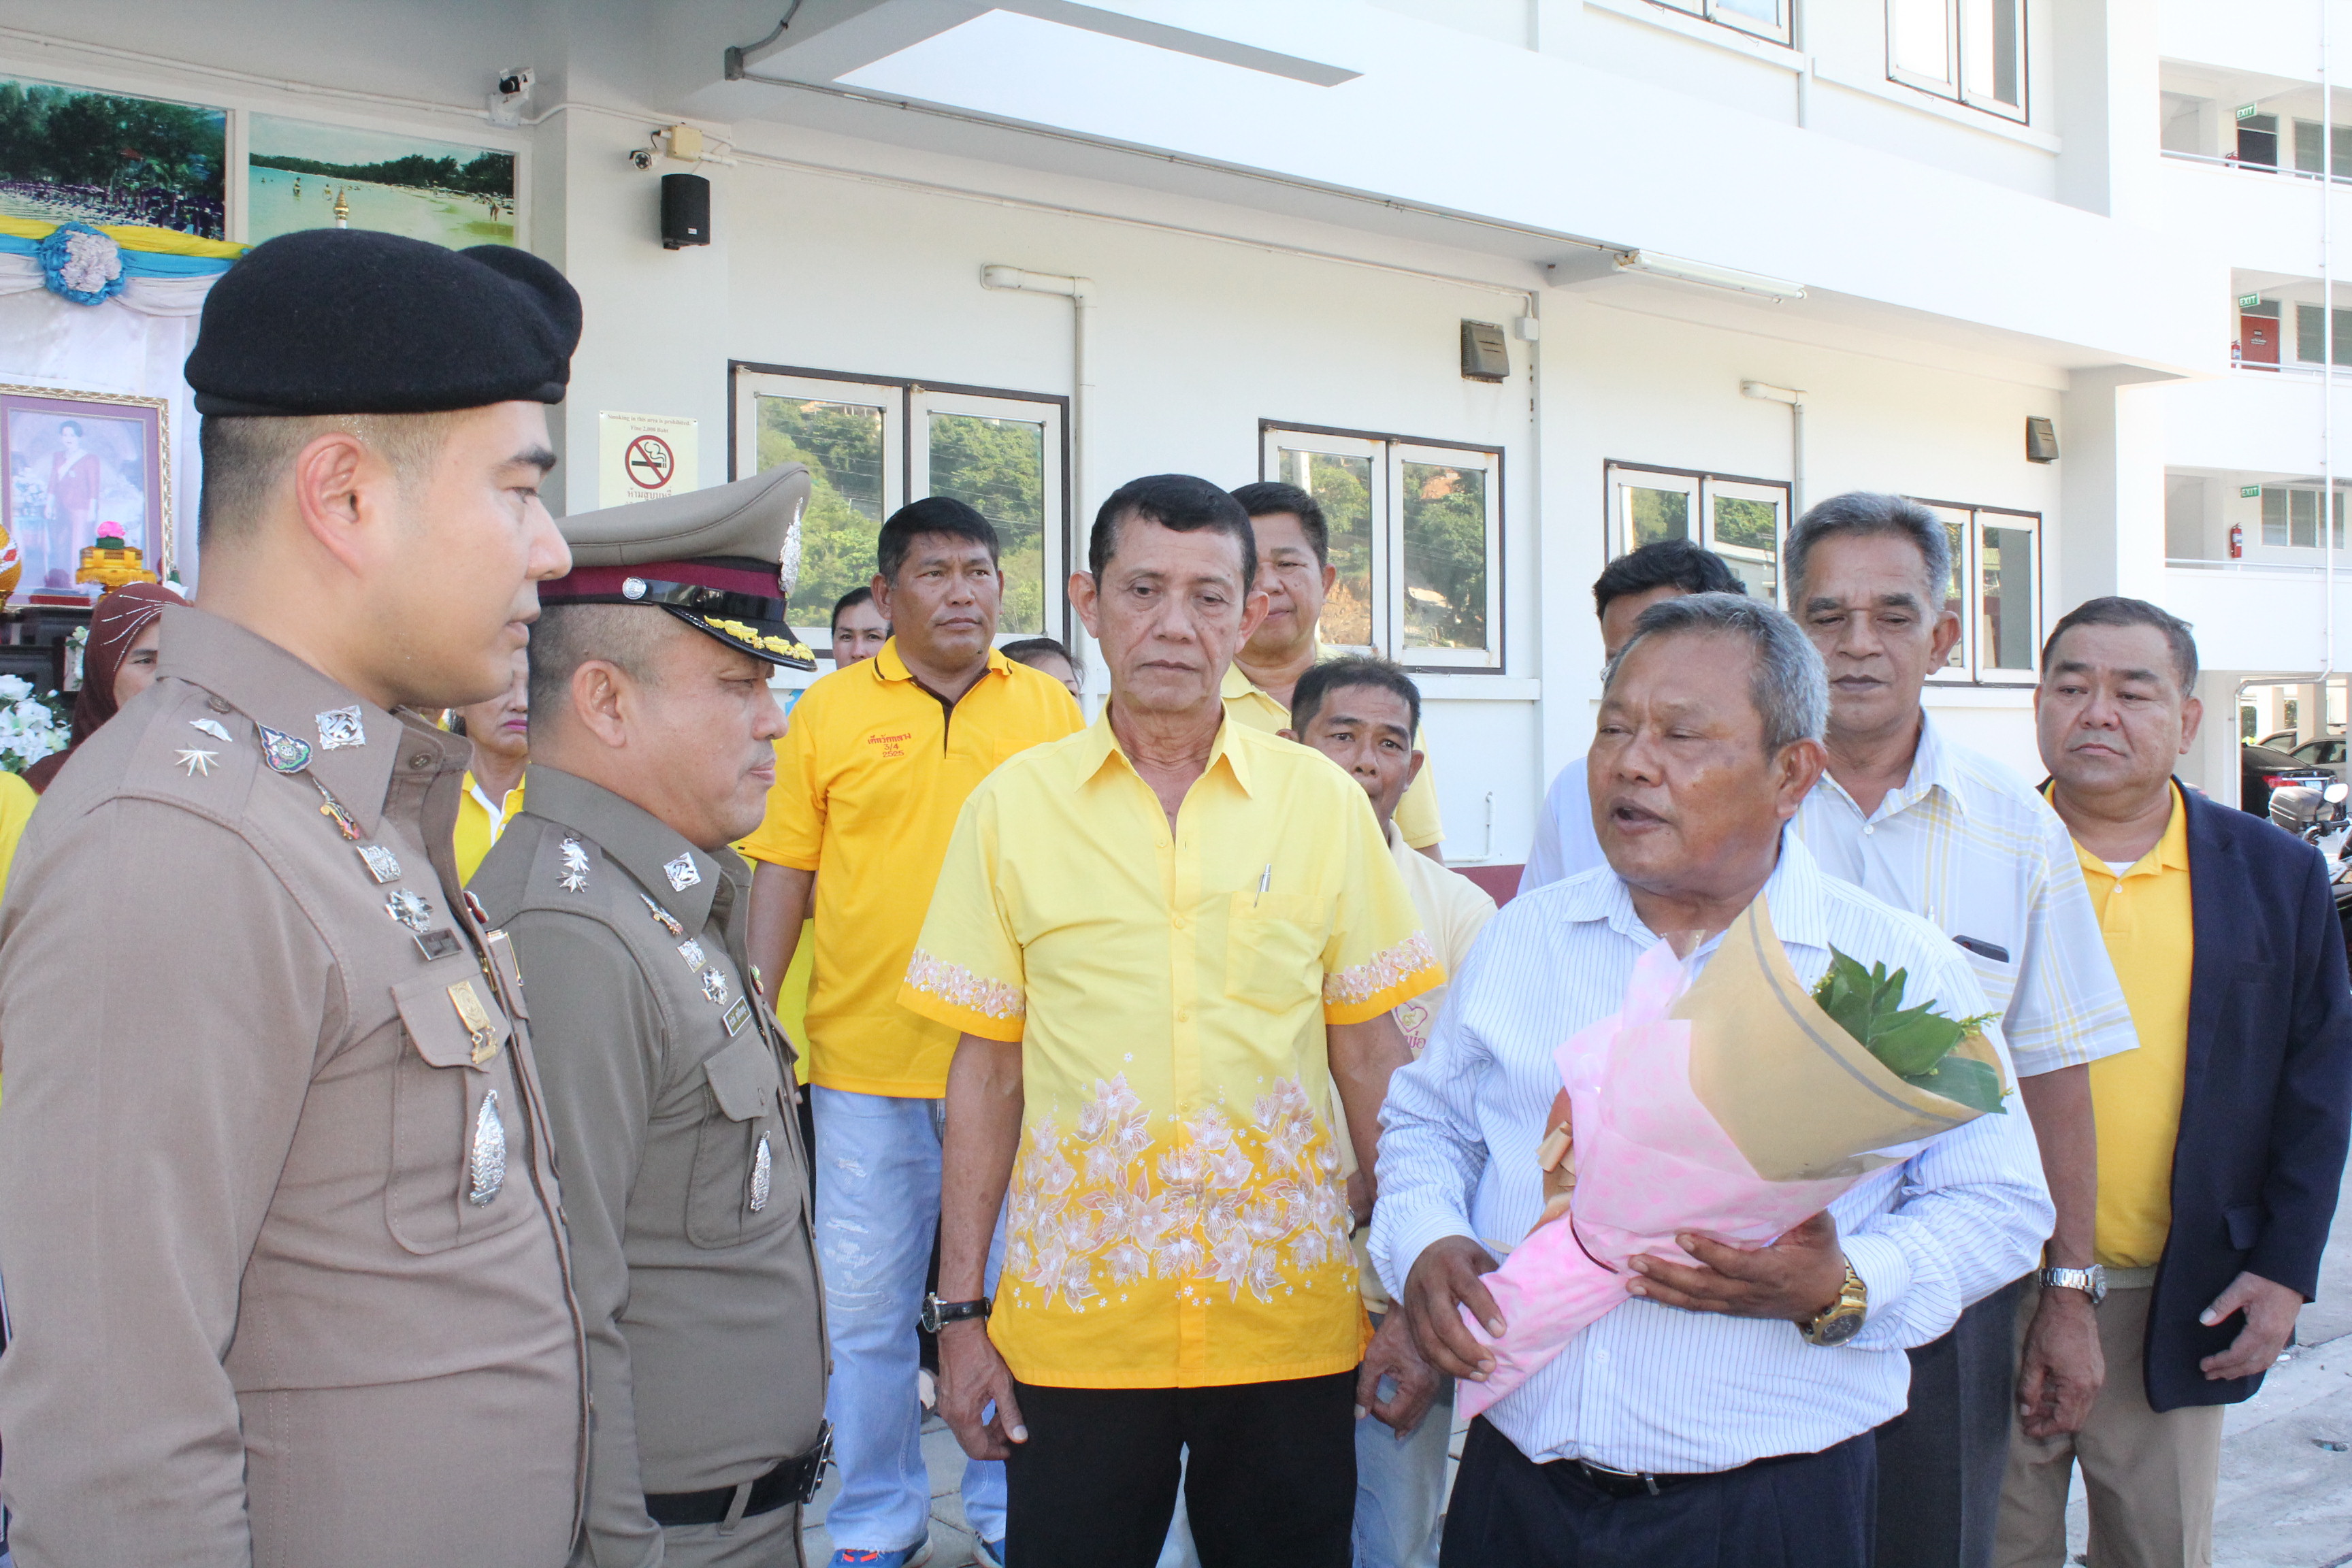 Locals giving a flower bouquet as a gesture of support to Prateung on Aug. 19.